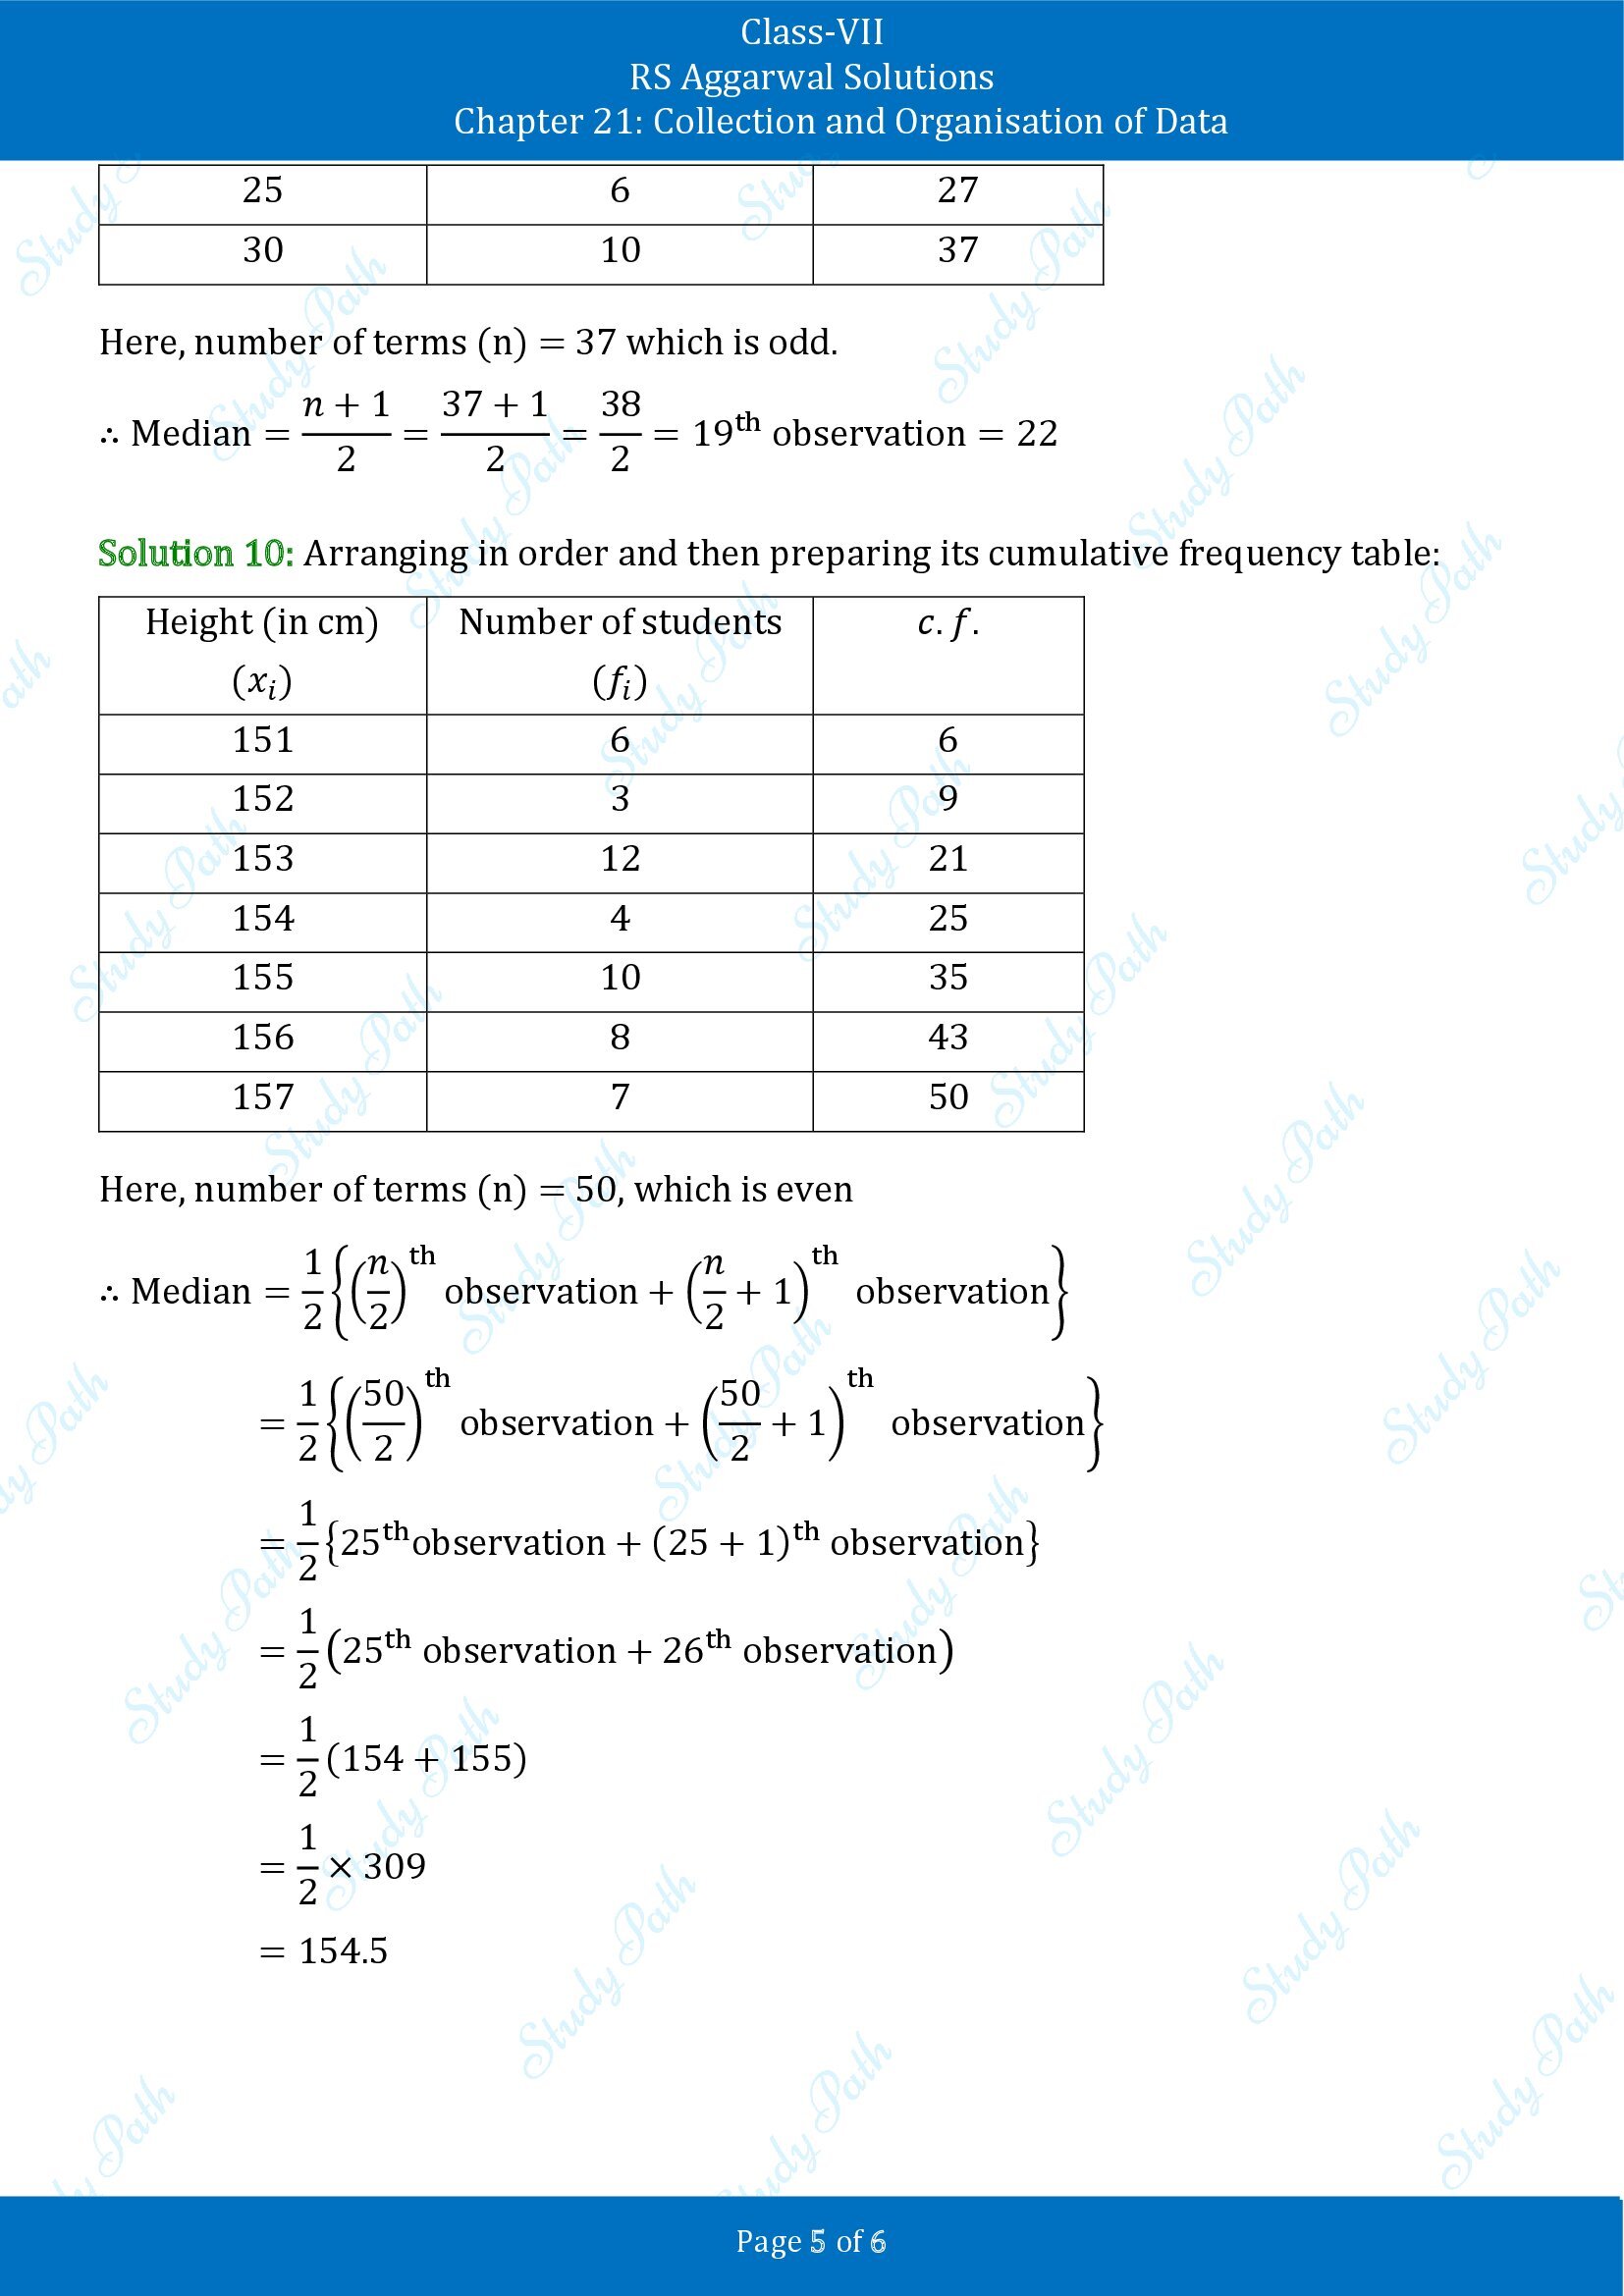 RS Aggarwal Solutions Class 7 Chapter 21 Collection and Organisation of Data Exercise 21B 00005